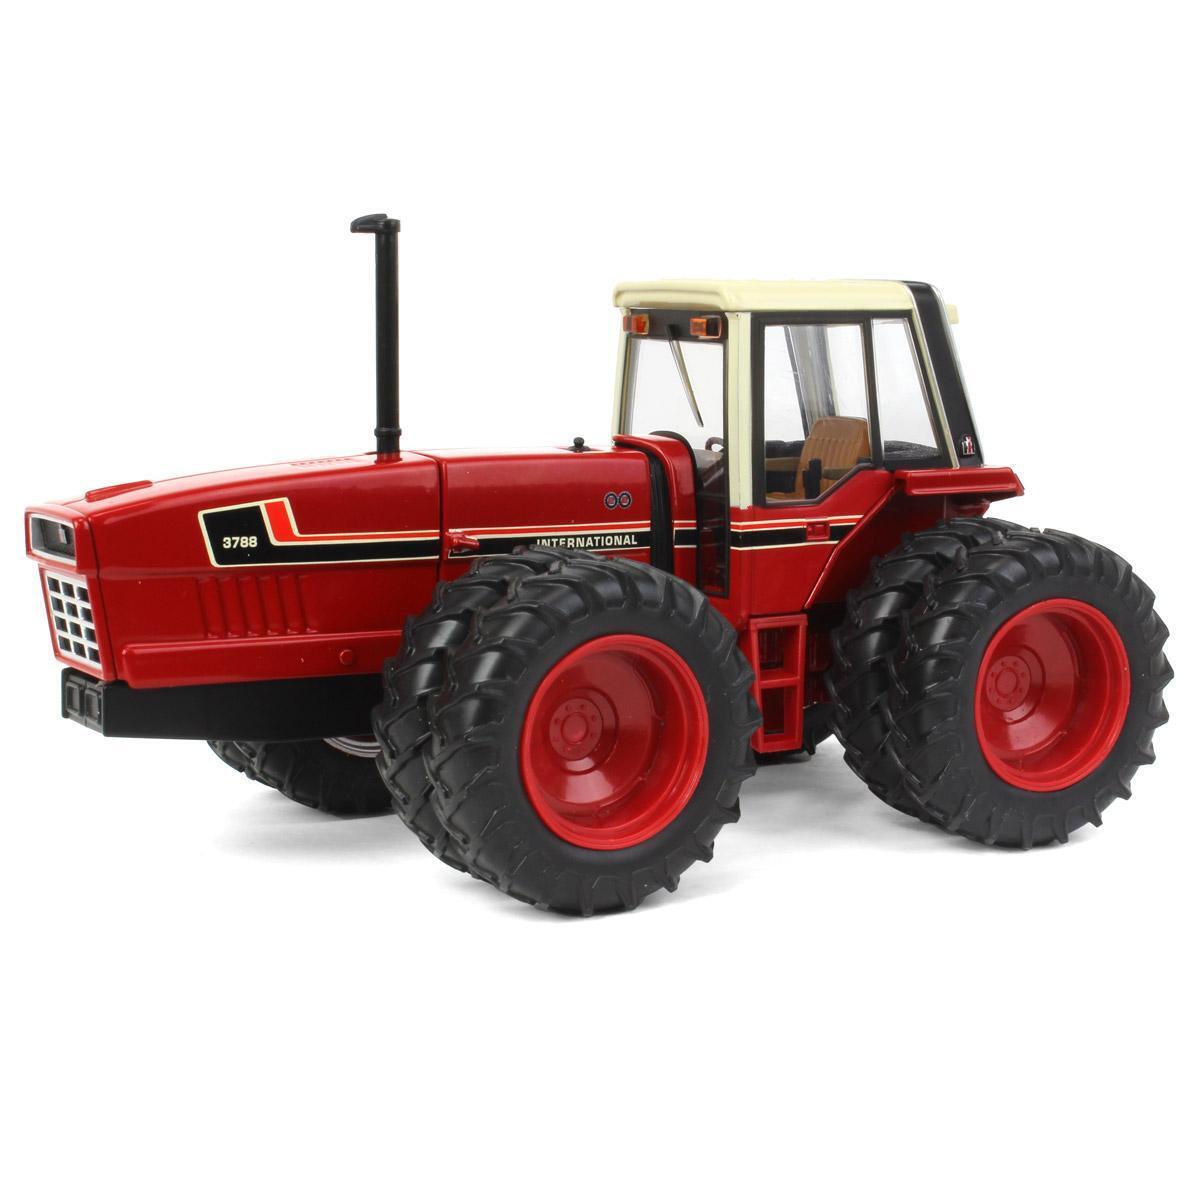 ERTL 1/32 International Harvester 3788 2+2 with Front & Rear Duals, 44322